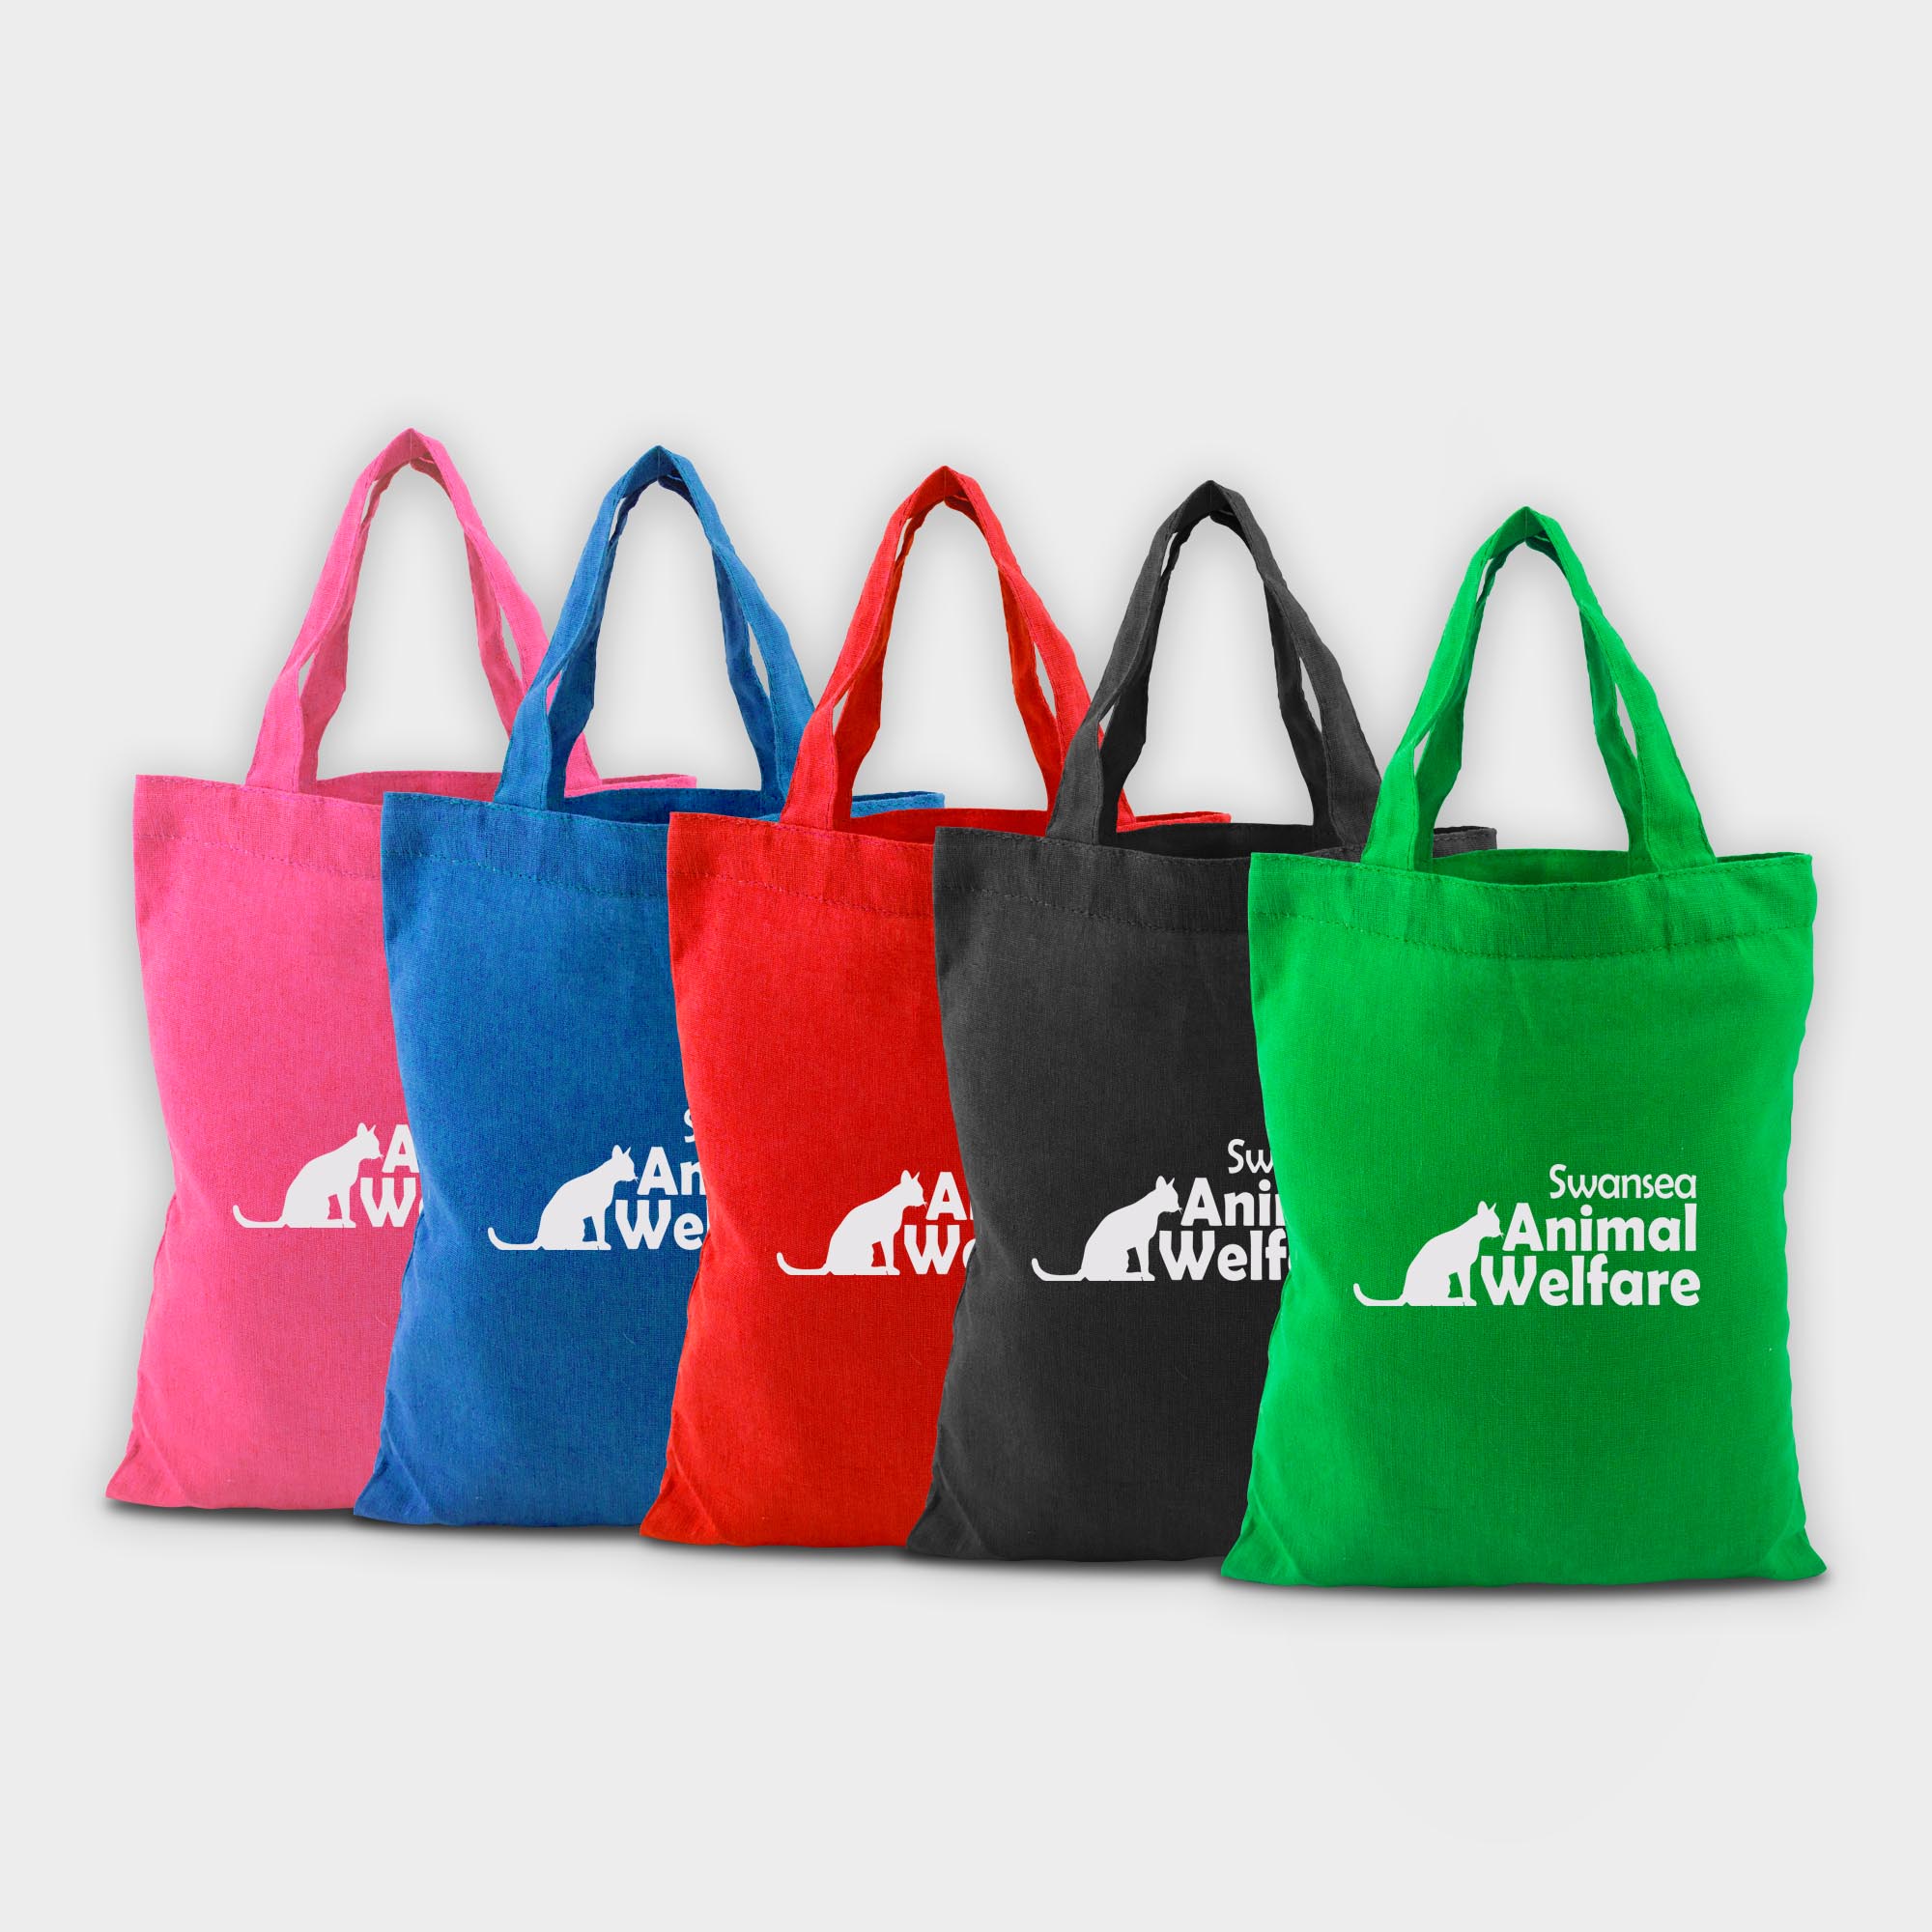 The Green & Good Greenwich Bag is made from coloured natural cotton. This bag has been dyed with AZO-free dyes, which are better for the environment. Small tote bag with short handles. Perfect for those special gifts. Ethically produced in India in an audited factory. 4oz / 120gsm cotton.